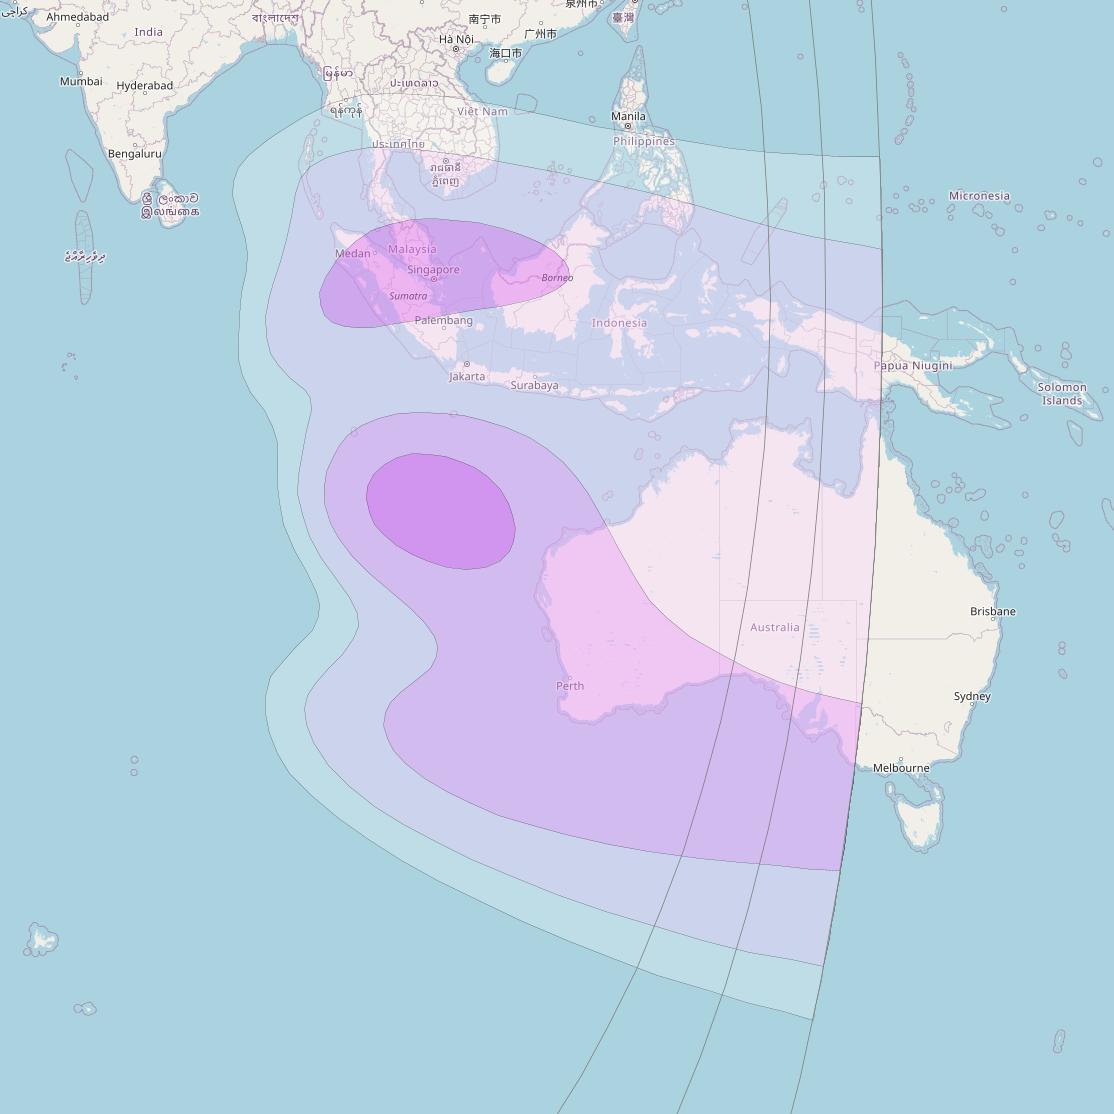 Intelsat 39 at 62° E downlink C-band South East Asia beam coverage map